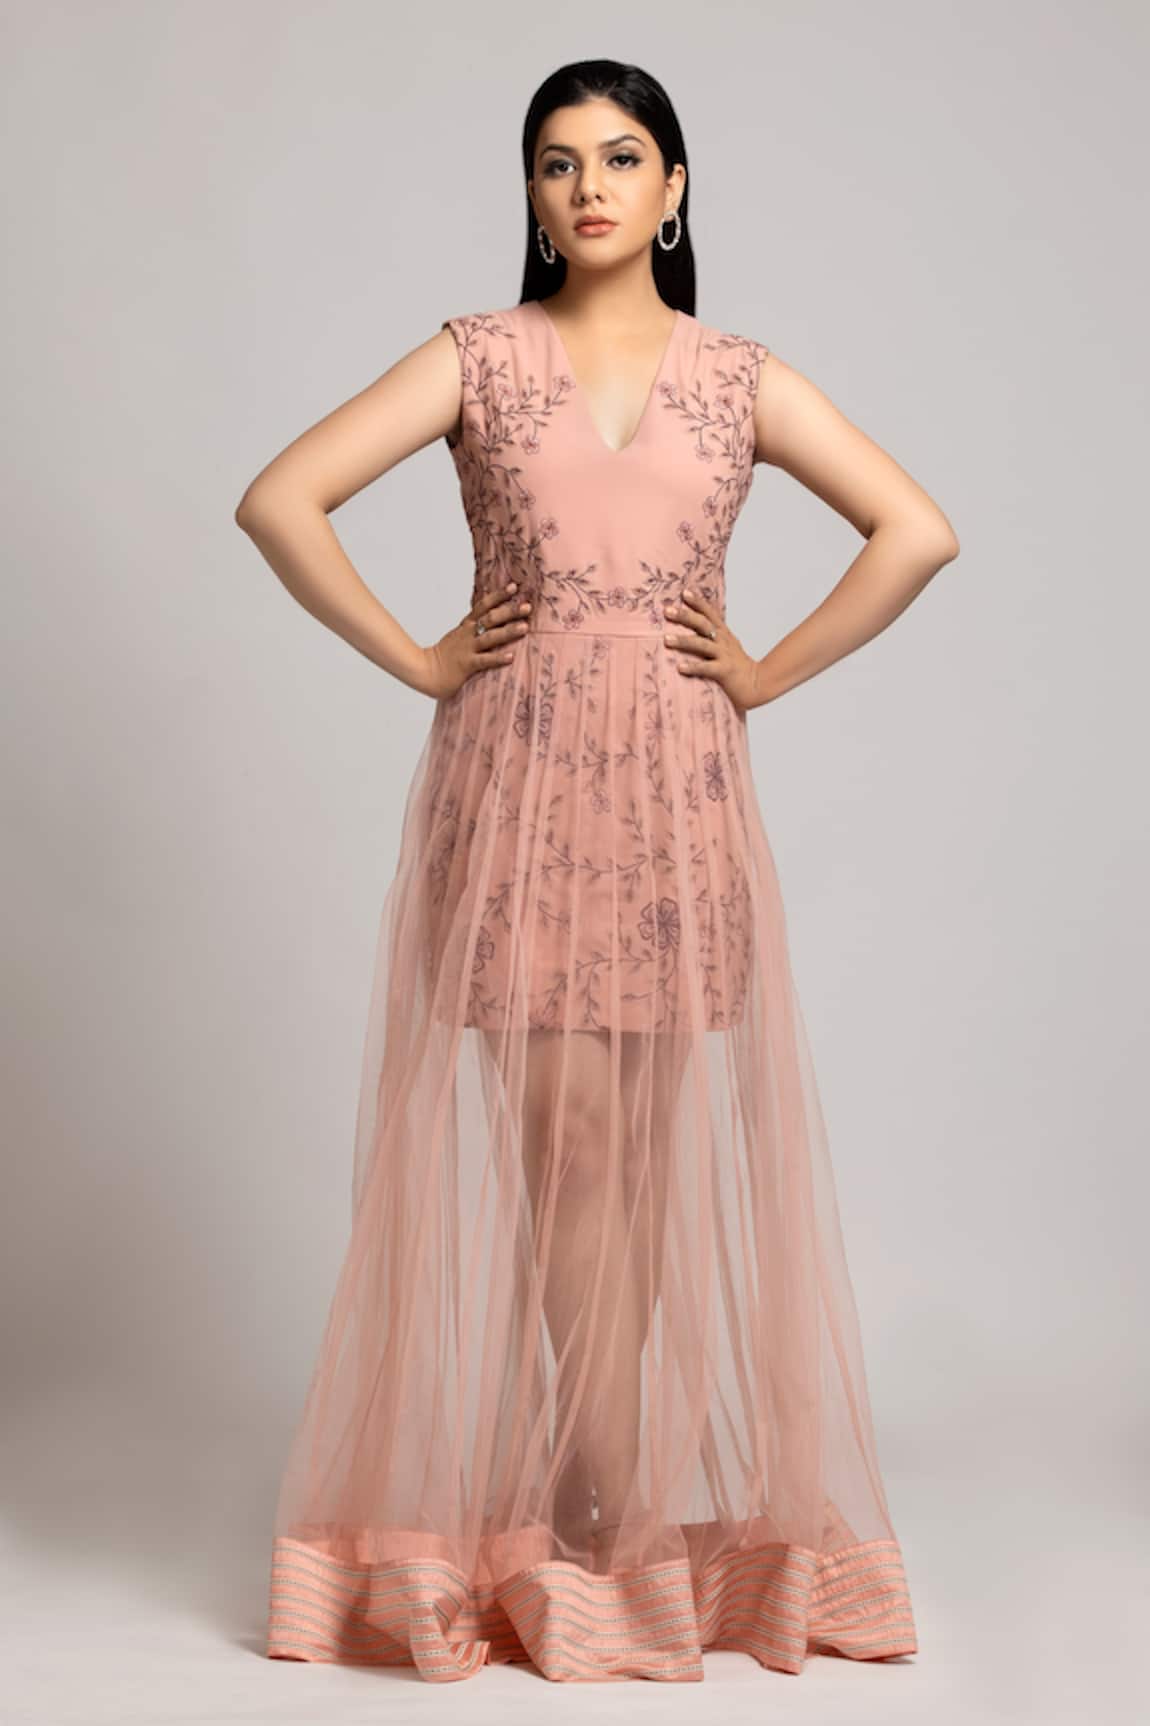 S & V Designs Floral Embroidered Layered Gown